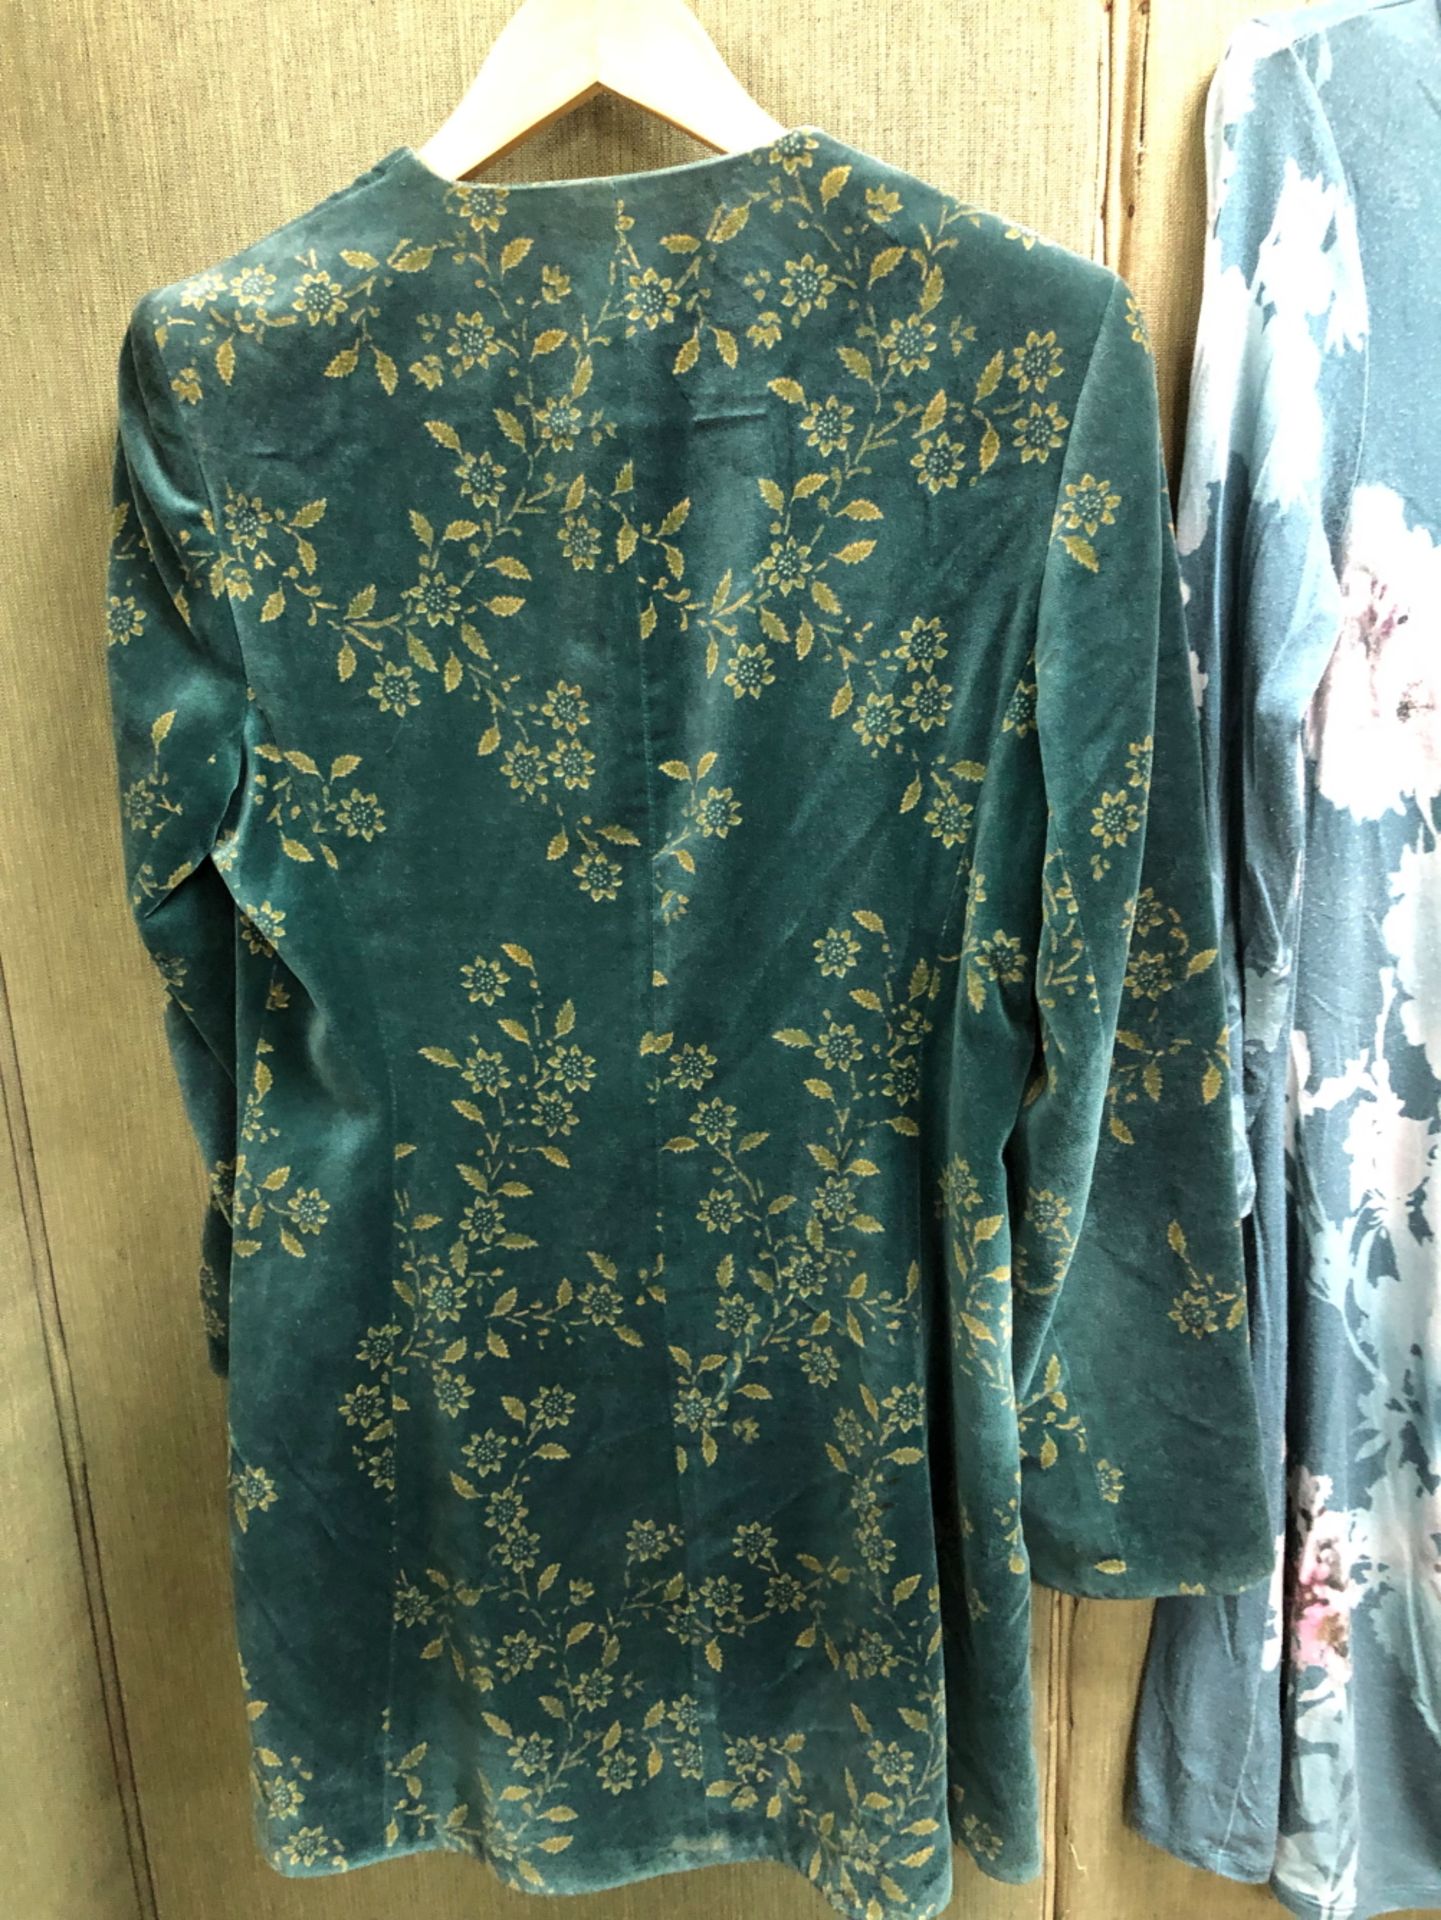 A LAURA ASHLEY GREEN JACKET WITH FLORAL DESIGN UK SIZE 12, TOGETHER WITH A LAURA ASHLEY FLORAL DRESS - Image 6 of 12